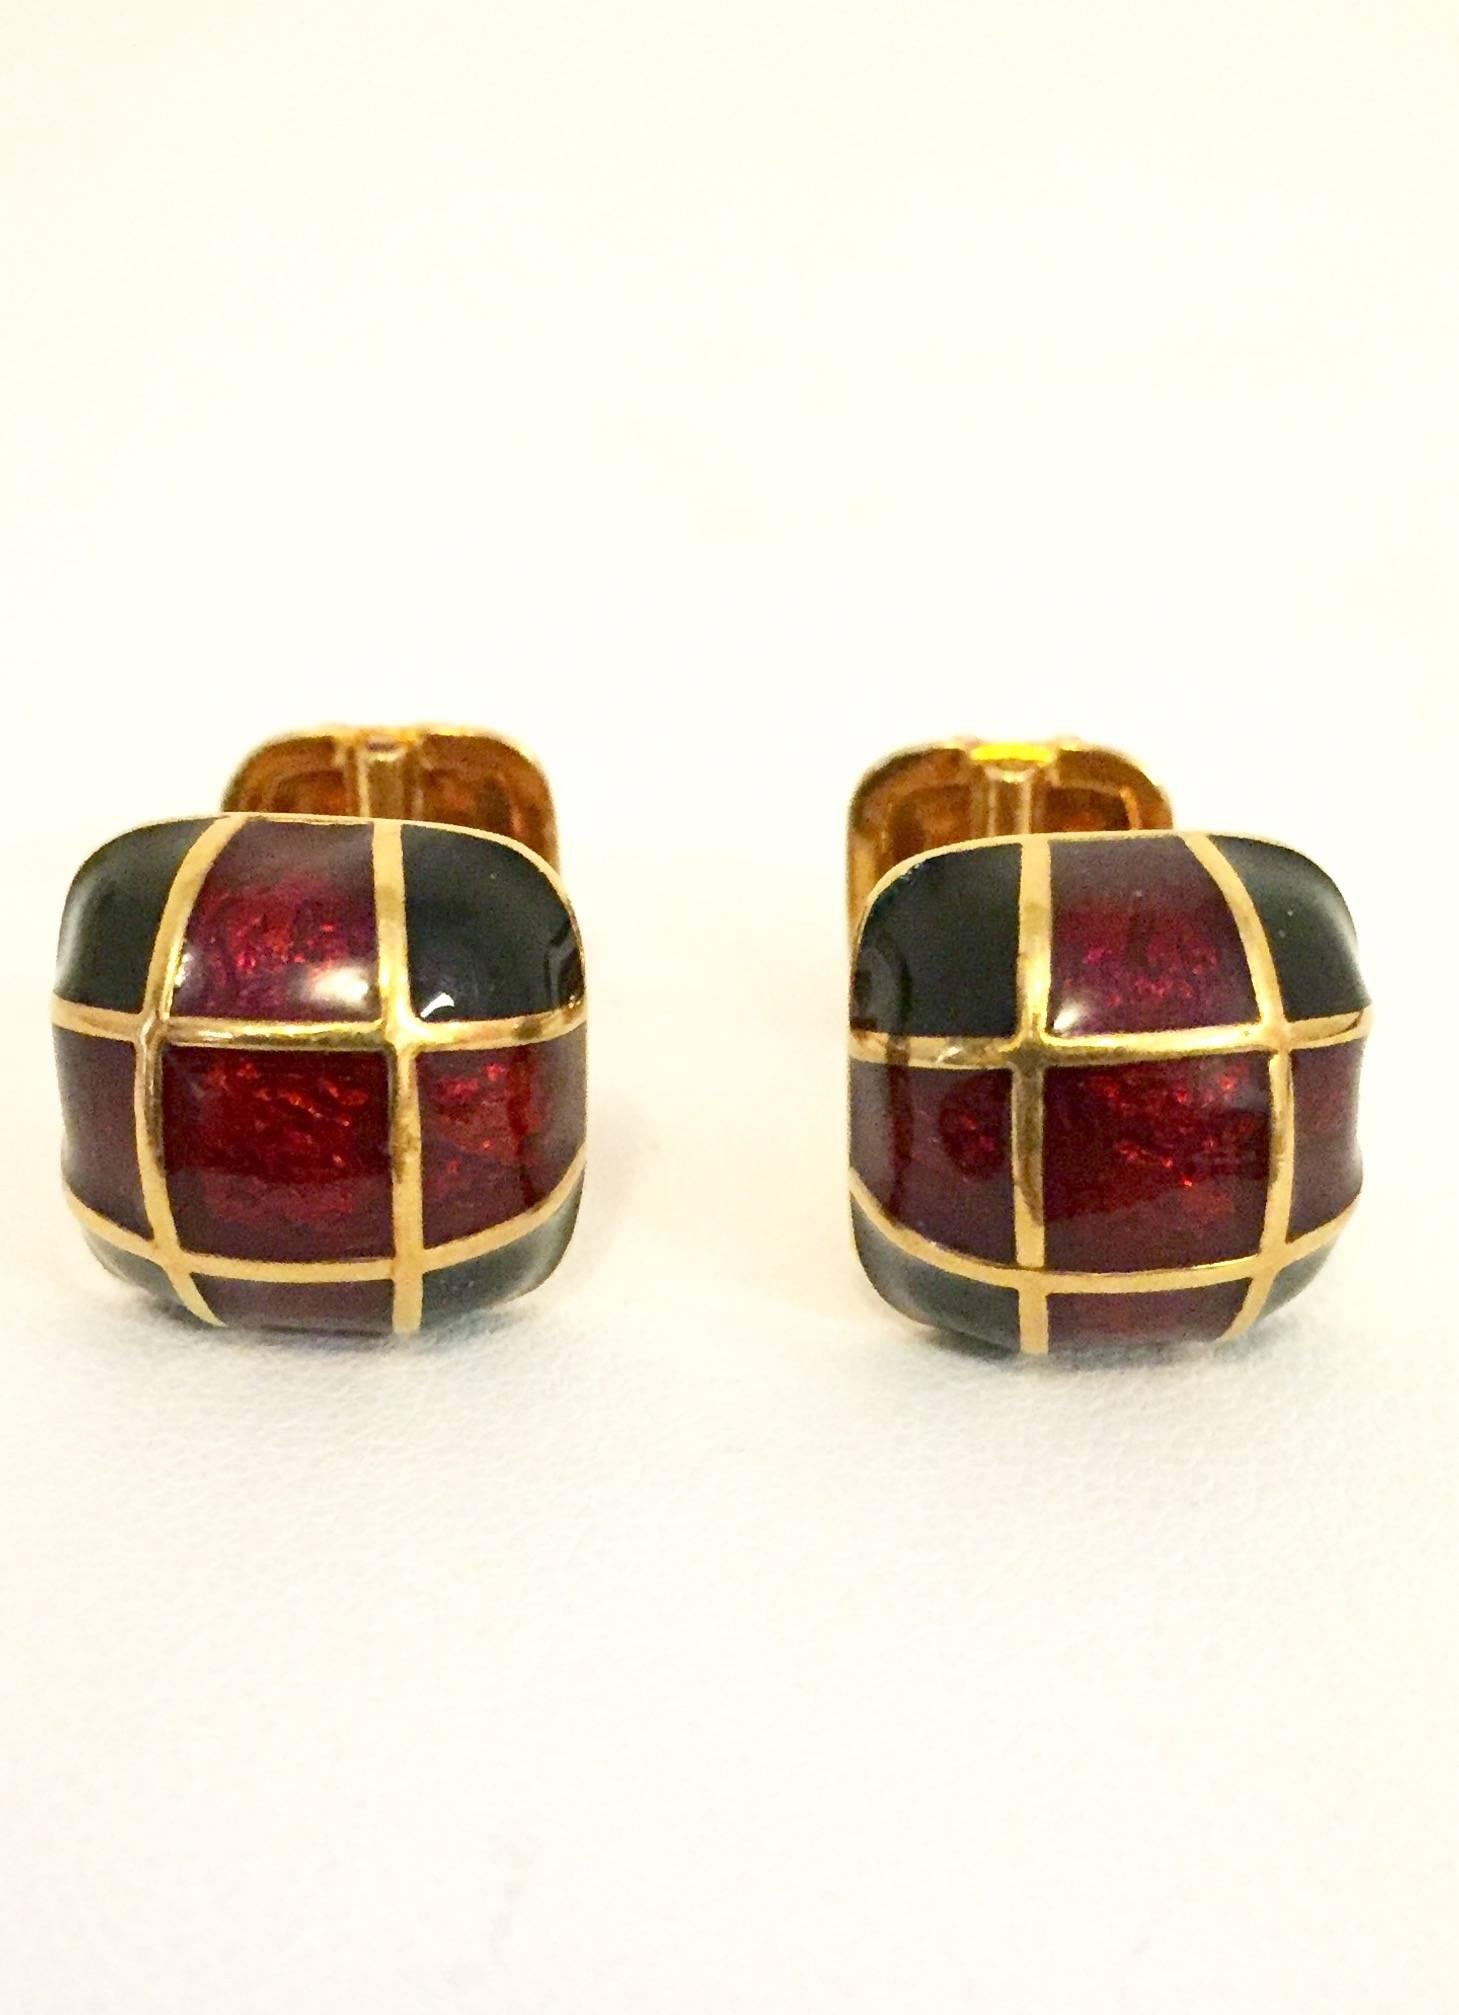 From the iconic American design house of David Webb come these fabulous 18 karat cufflinks.  Their rich tradition of design, craftsmanship and creativity are displayed perfectly!  Each barbell end features a domed square in shades of rich, deep red